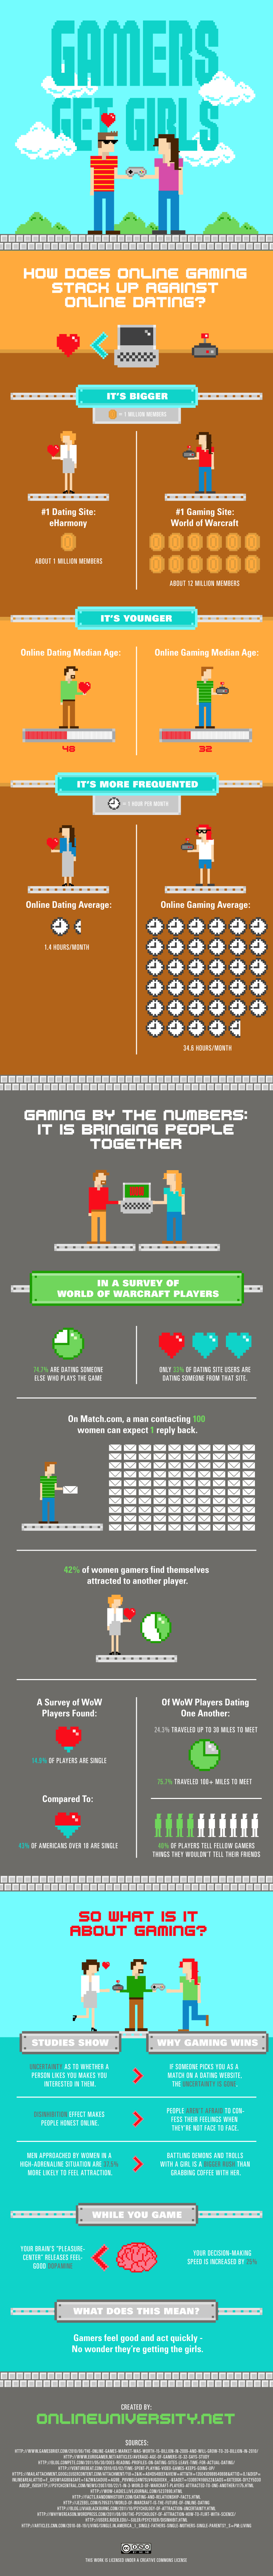 Gamers Get Girls: Online Gaming vs. Online Dating [Infographic]